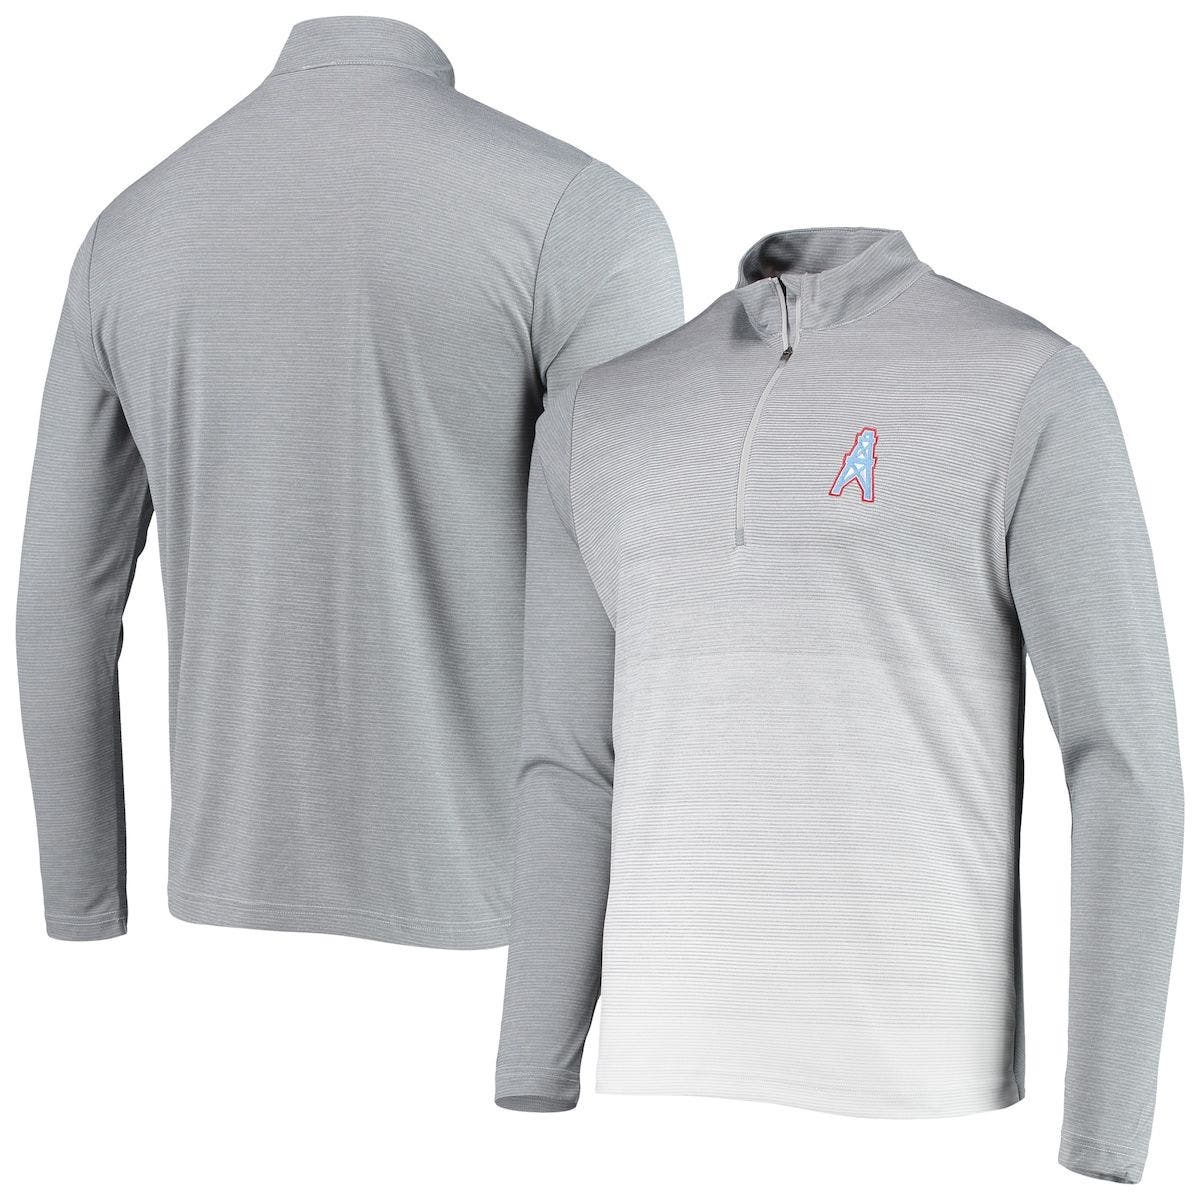 ANTIGUA Men's Antigua Heathered Gray/White Houston Oilers Throwback Cycle Quarter-Zip Jacket in Heather Gray at Nordstrom